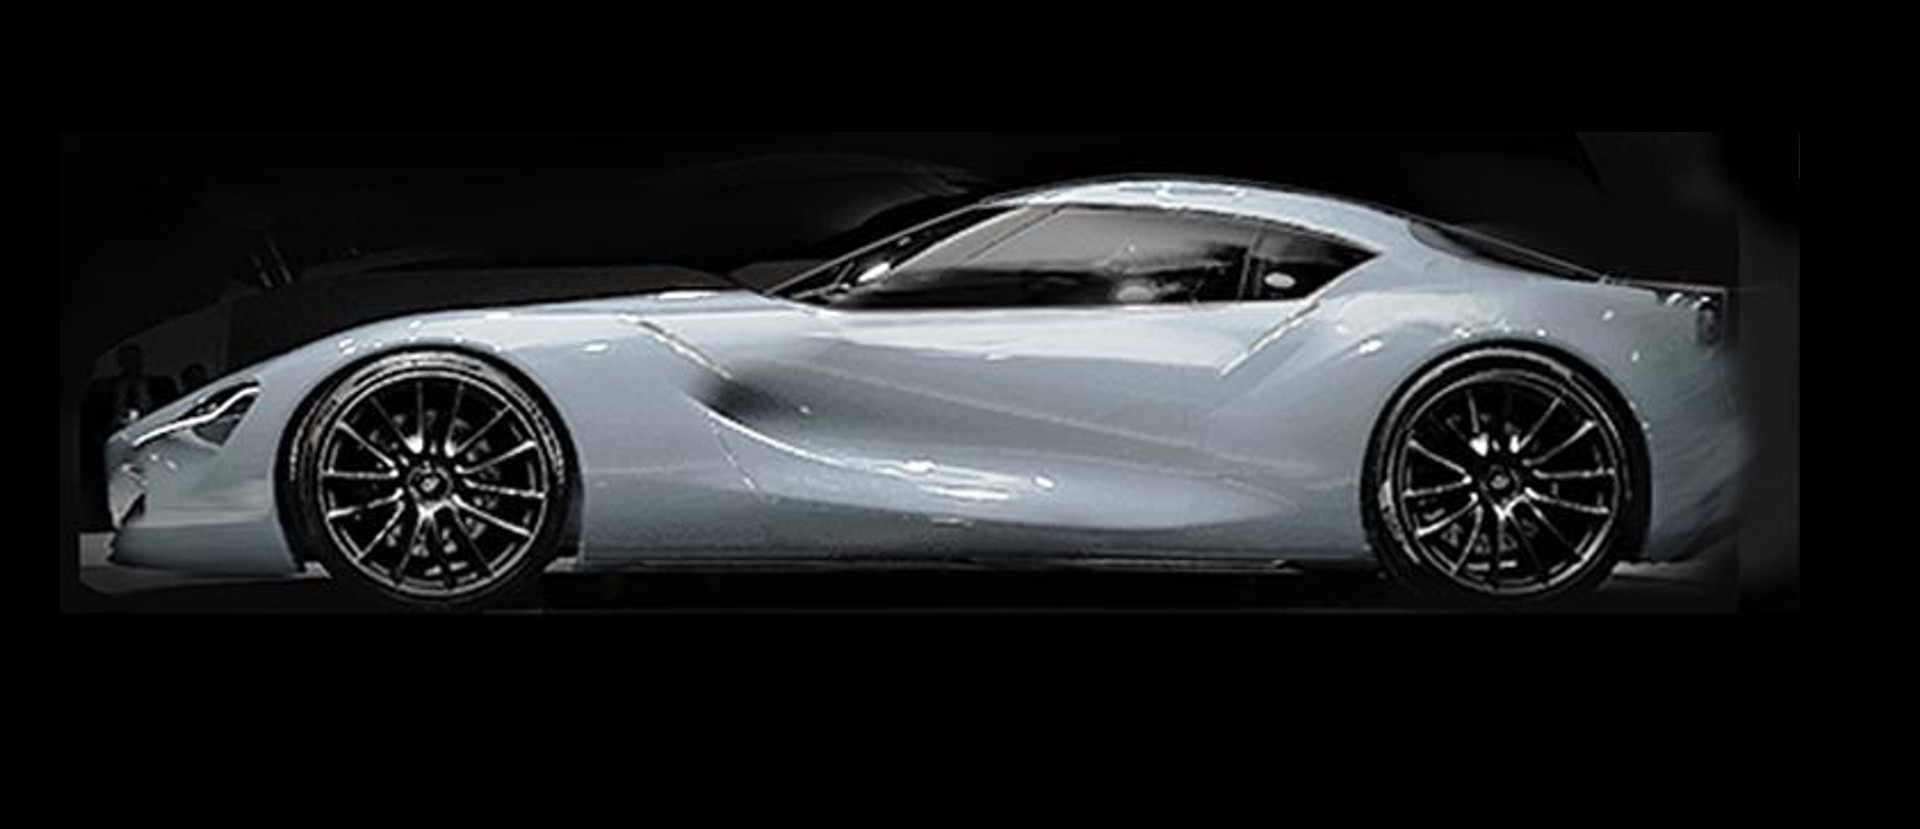 Toyota-GR-Supra-Early-Sketches-4.jpg